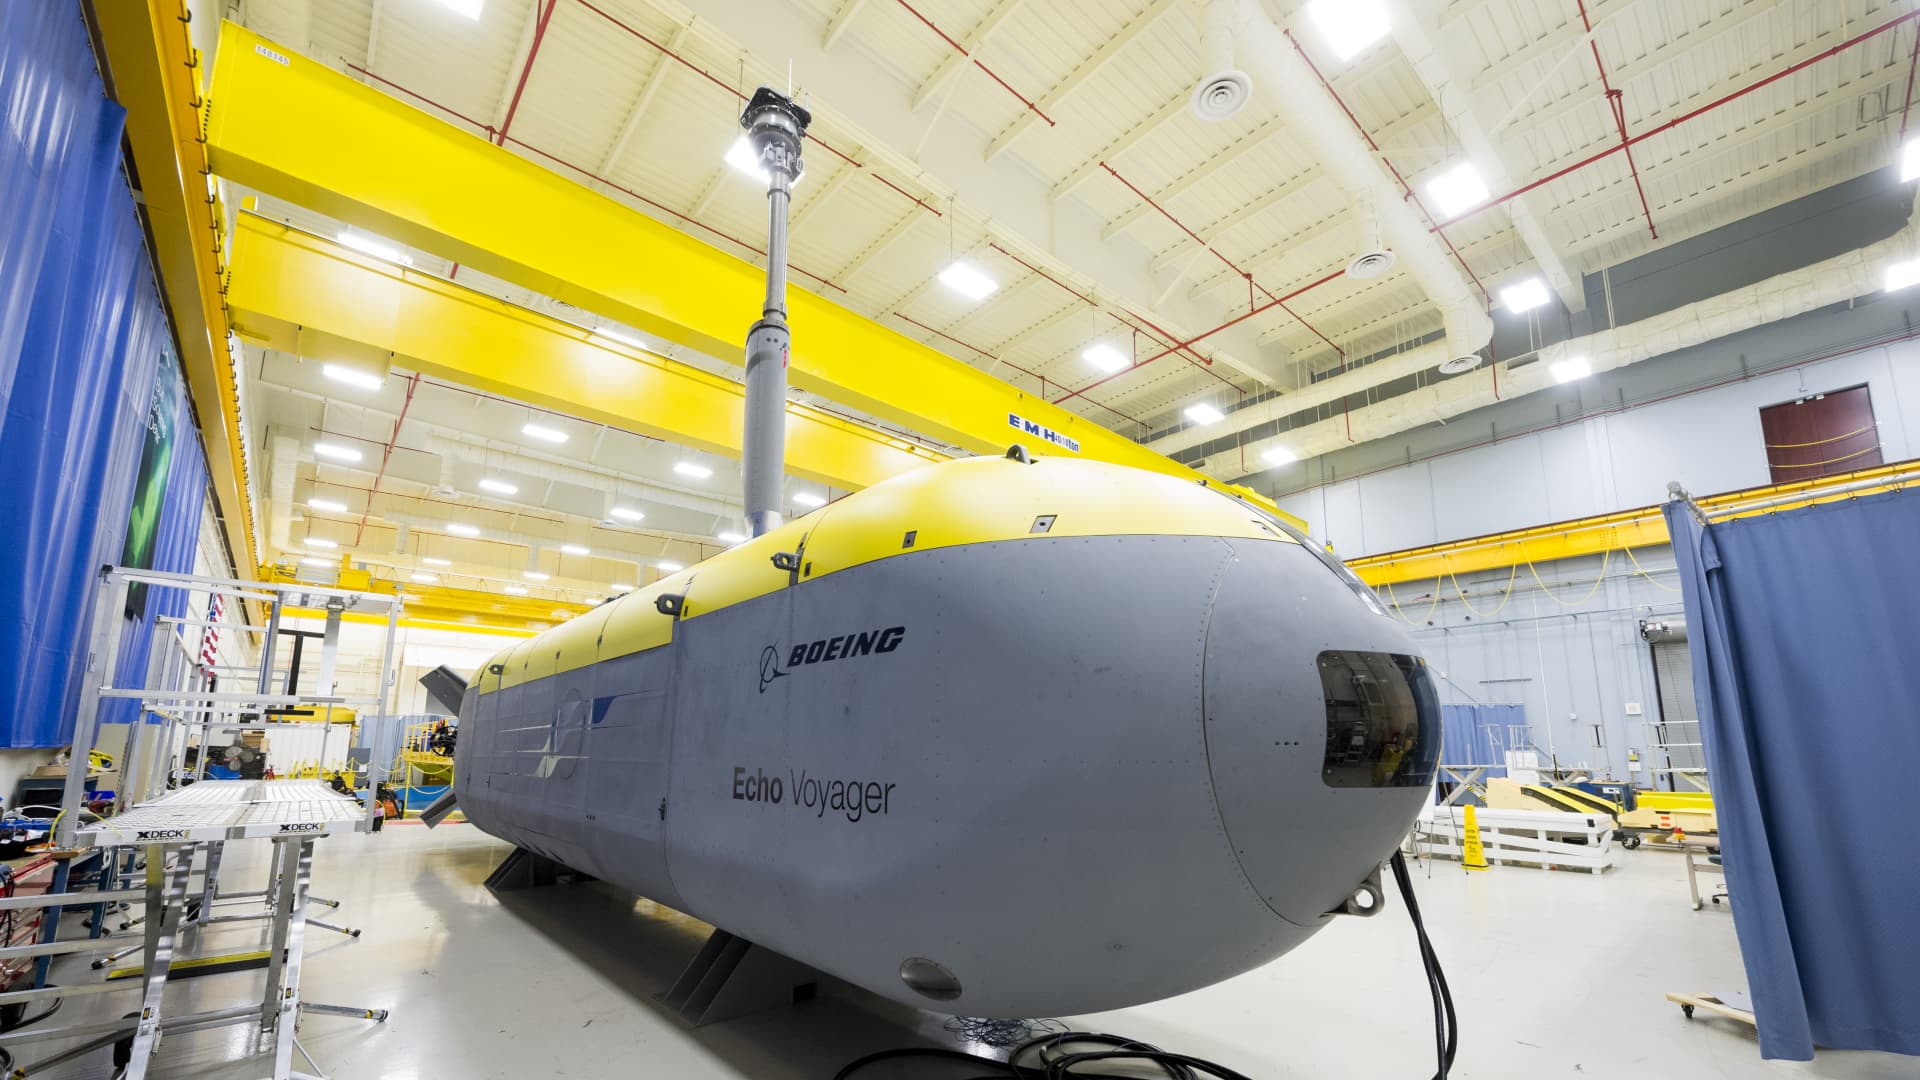 Boeing's latest unmanned, undersea vehicle (UUV), the 51-foot Echo Voyager.